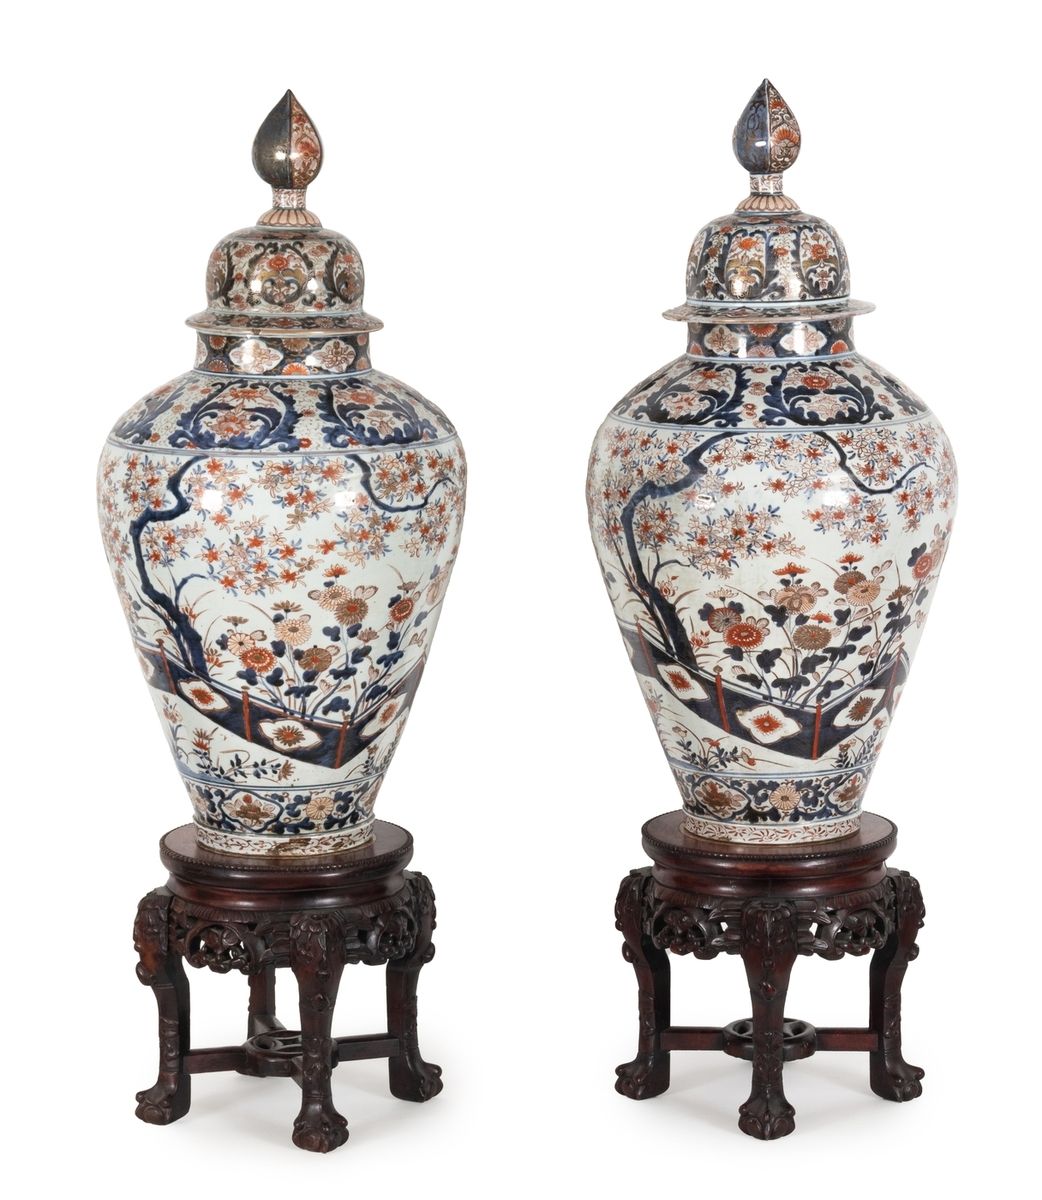 Null Japan, Edo period (1603-1868)
A pair of large porcelain covered vases with &hellip;